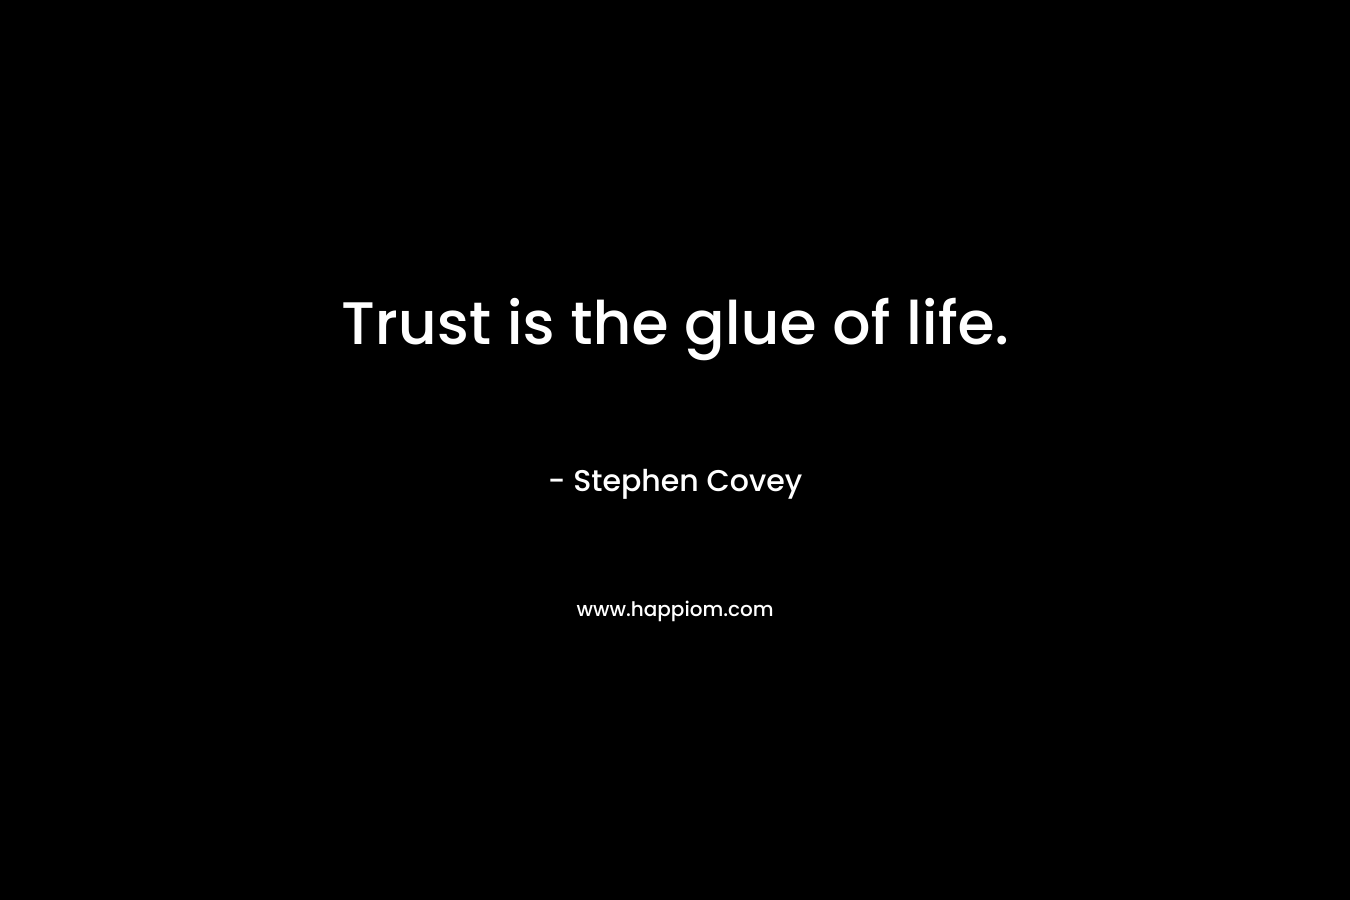 Trust is the glue of life. – Stephen Covey